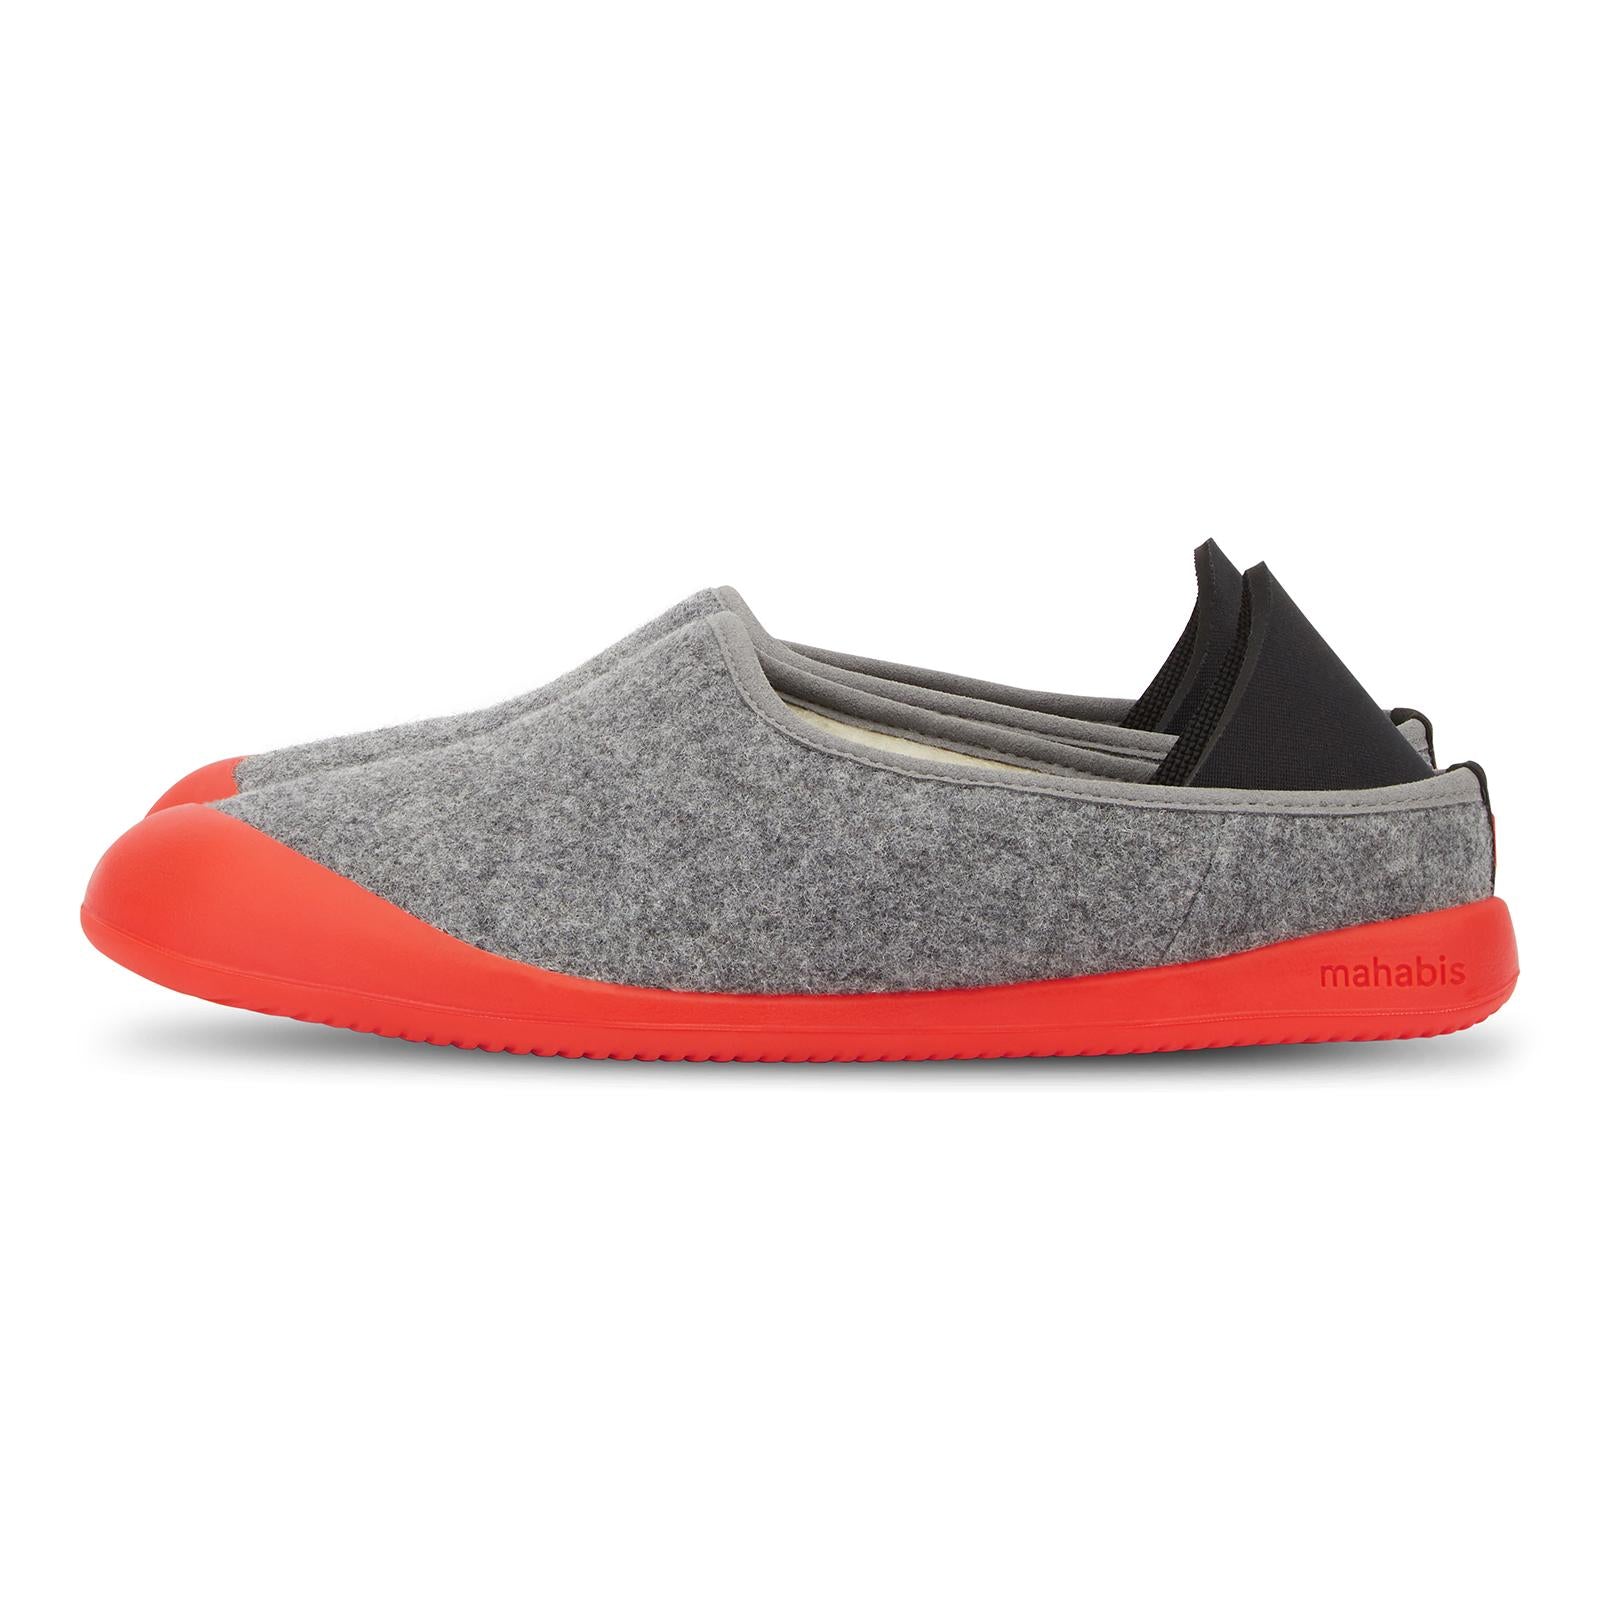 mahabis curve in light grey x marrakech red